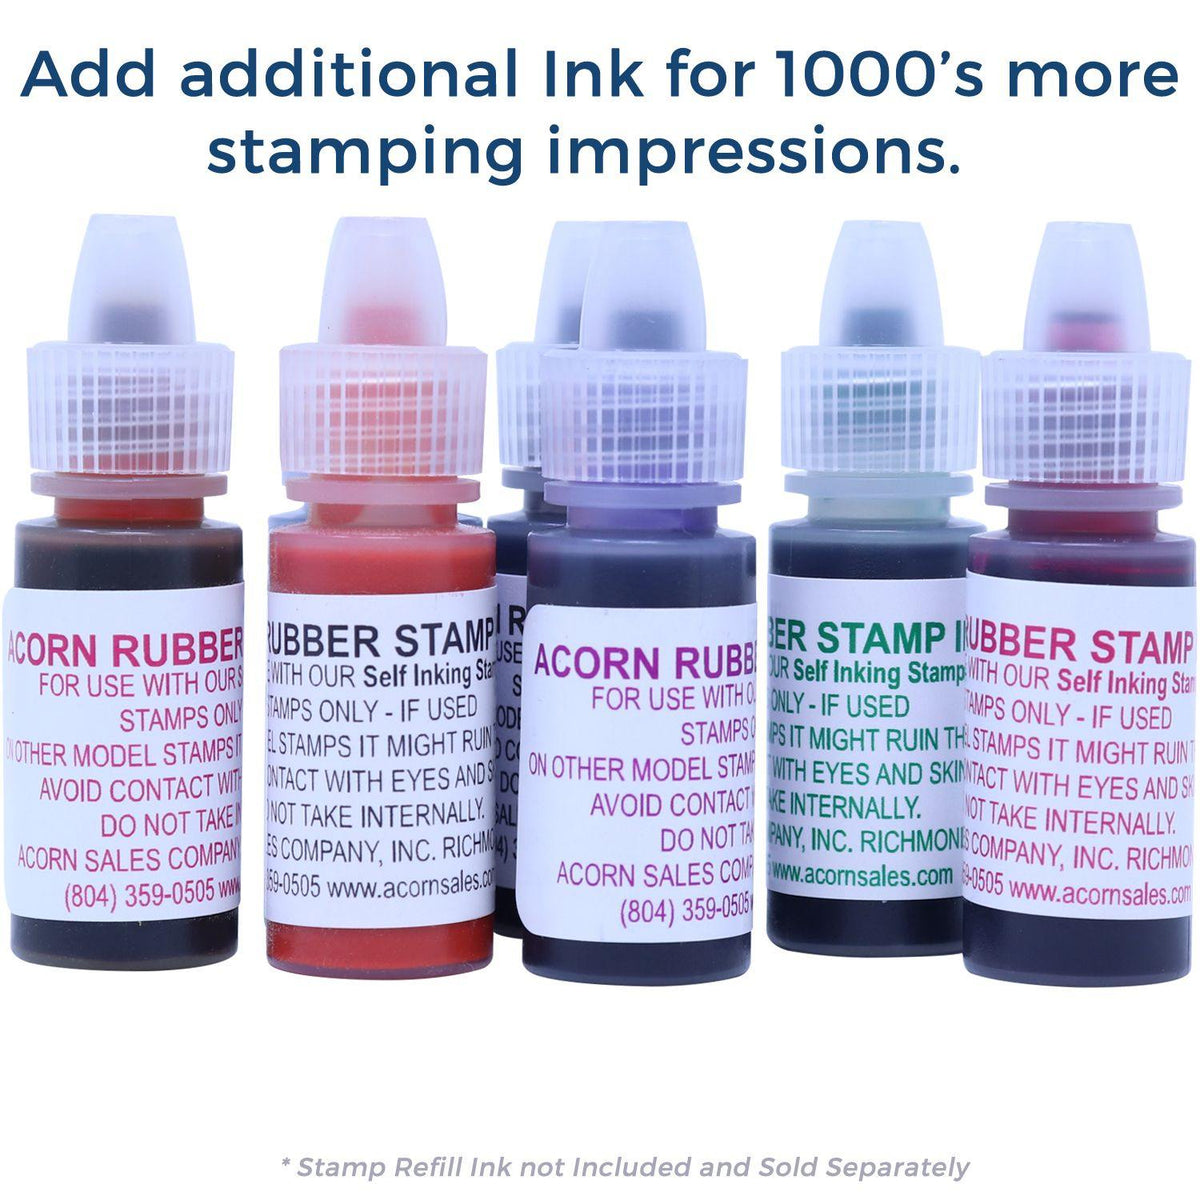 Slim Pre Inked Air Mail Stamp - Engineer Seal Stamps - Brand_Slim, Impression Size_Small, Stamp Type_Pre-Inked Stamp, Type of Use_Postal &amp; Mailing, Type of Use_Shipping &amp; Receiving